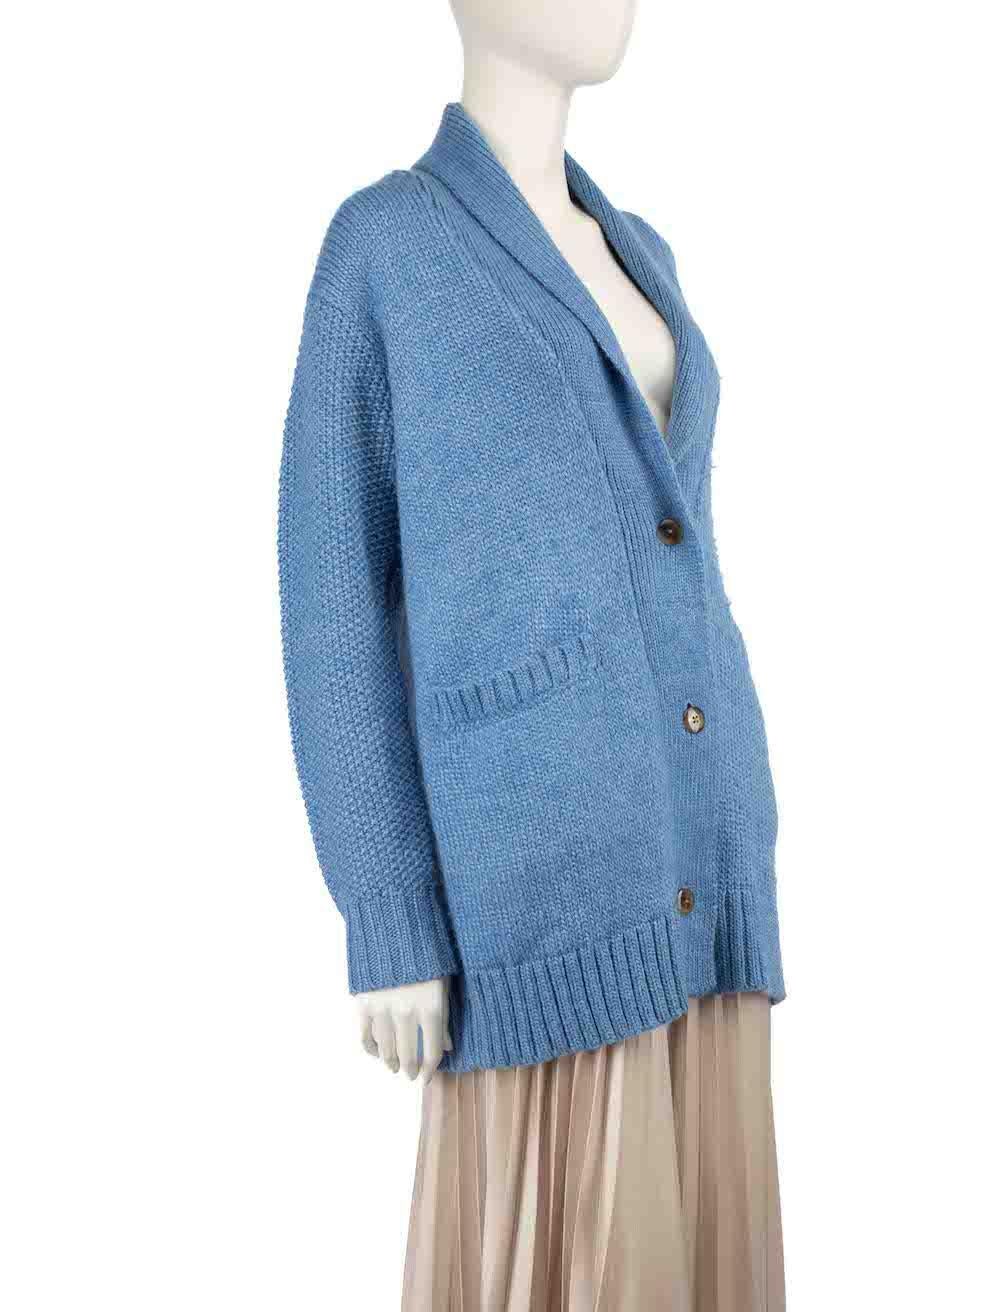 CONDITION is Very good. Minimal wear to cardigan is evident. Minimal wear to the knit with only very light pilling found and a discoloured mark seen near the left sleeve cuff and right front pocket on this used Hatch designer resale item.
 
